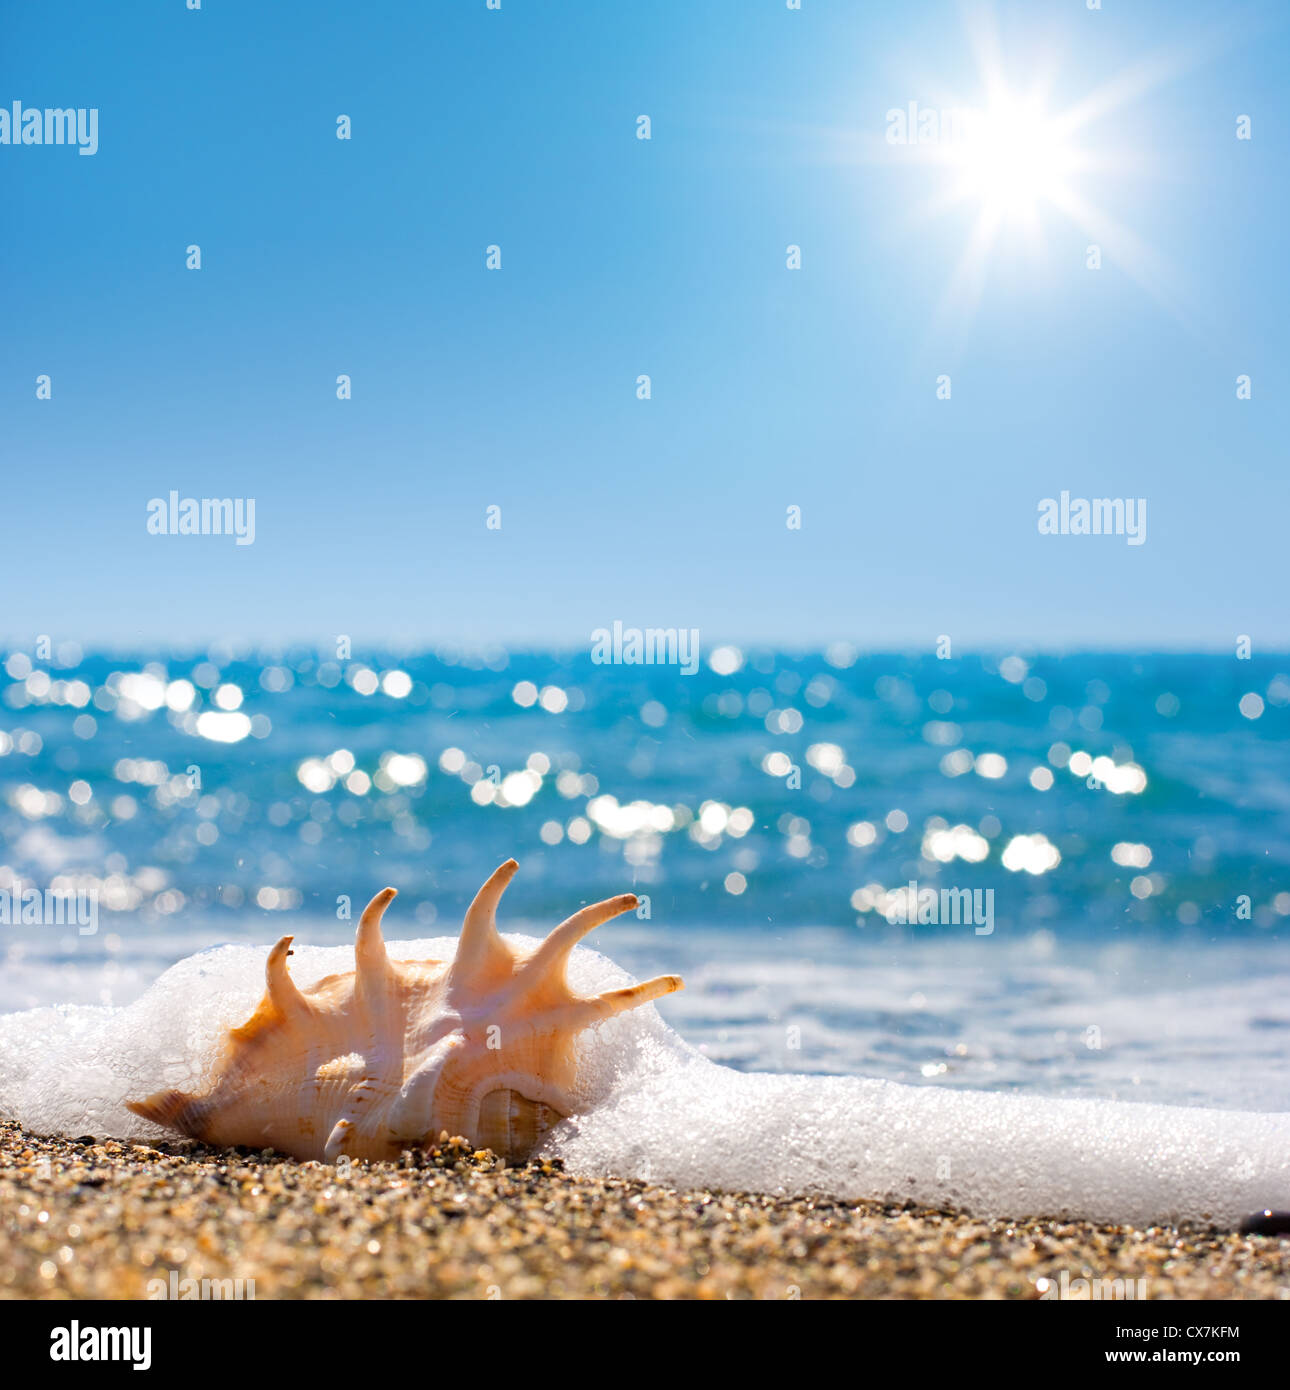 Long Cone Spiral Shape Beige and Light Brown Color Seashell Lying on the  Sandy Beach in Centre with Sea or Ocean Waves Background Stock Photo -  Image of closeup, bright: 196775916